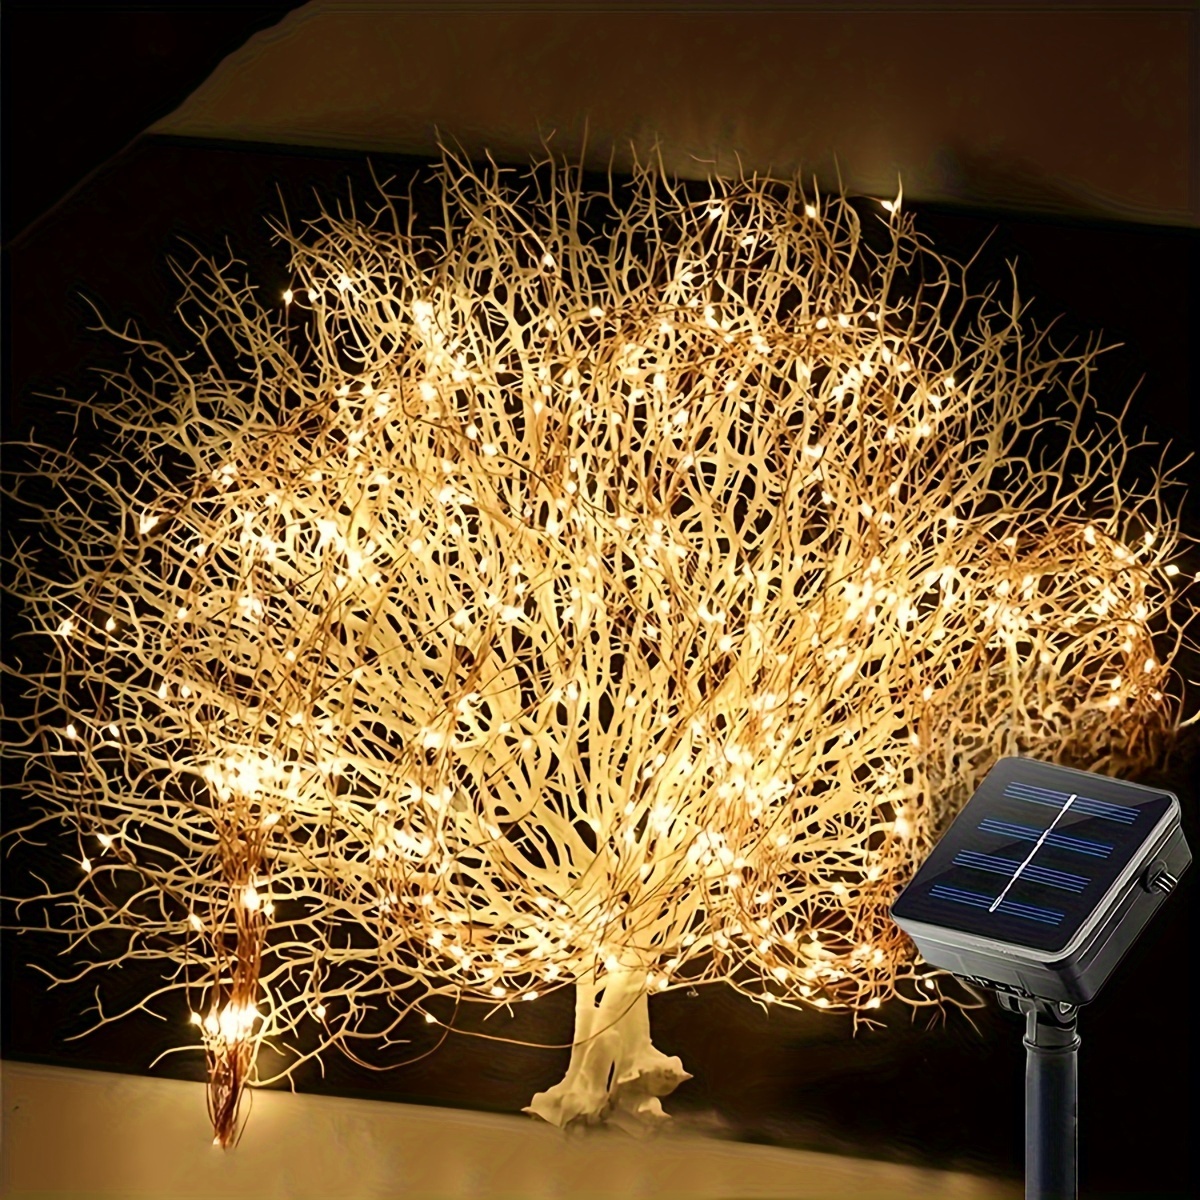 

Brighten Up Your Garden With 1pc Led Solar Fairy Lights - Perfect For Weddings, Parties And Christmas!